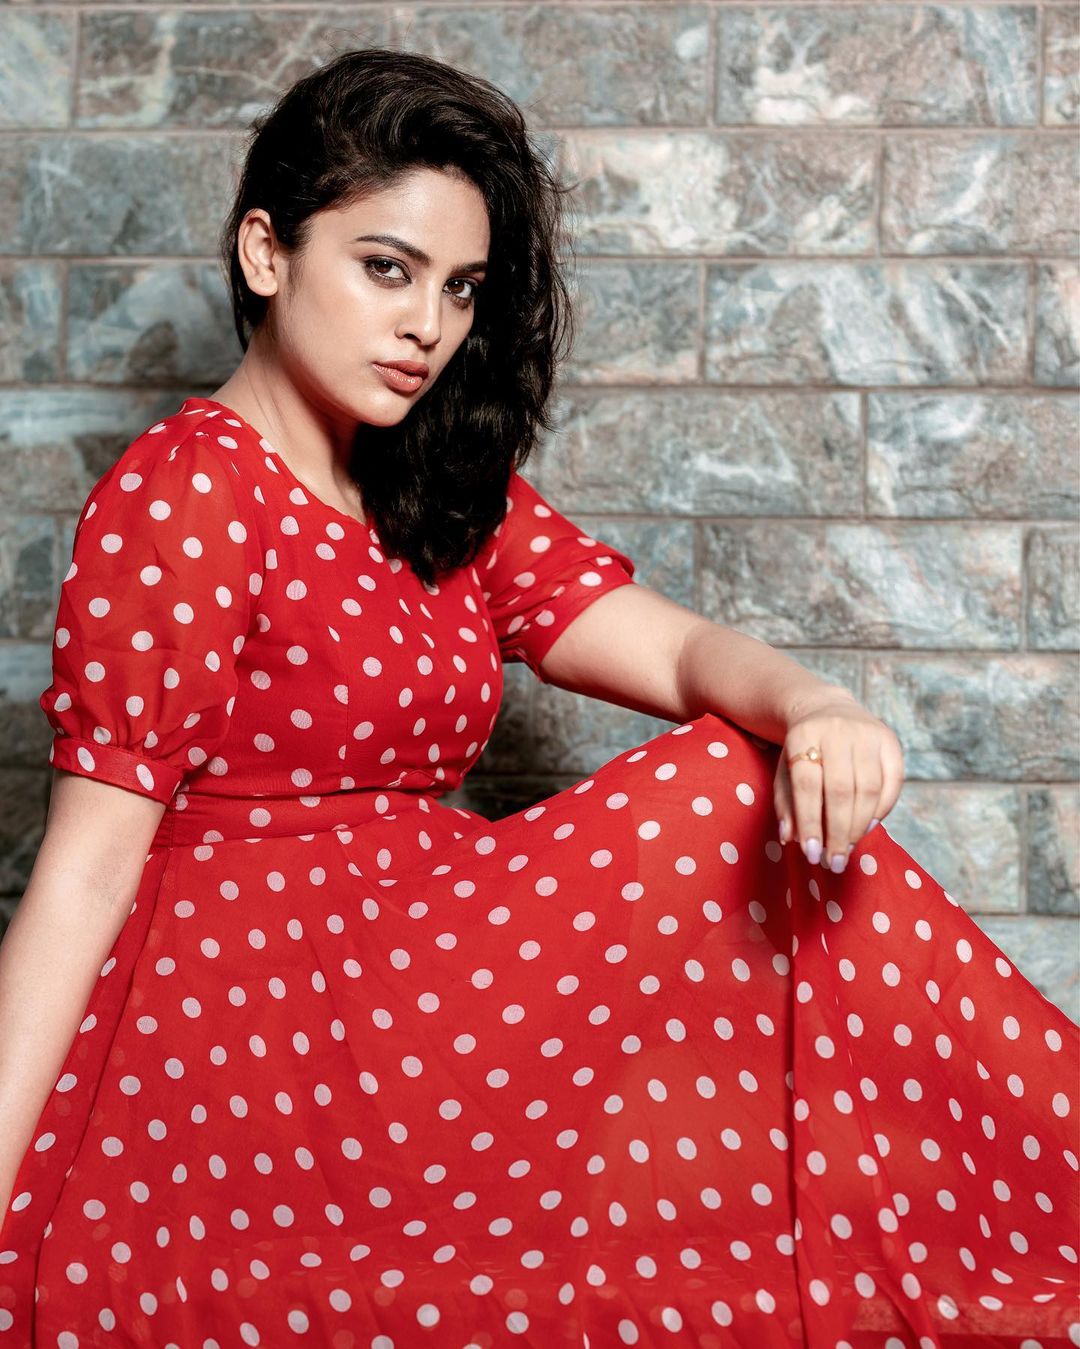 Tamil Actress Nandita Swetha Latest Hottest Stills Photos Hd Images Pictures Stills First